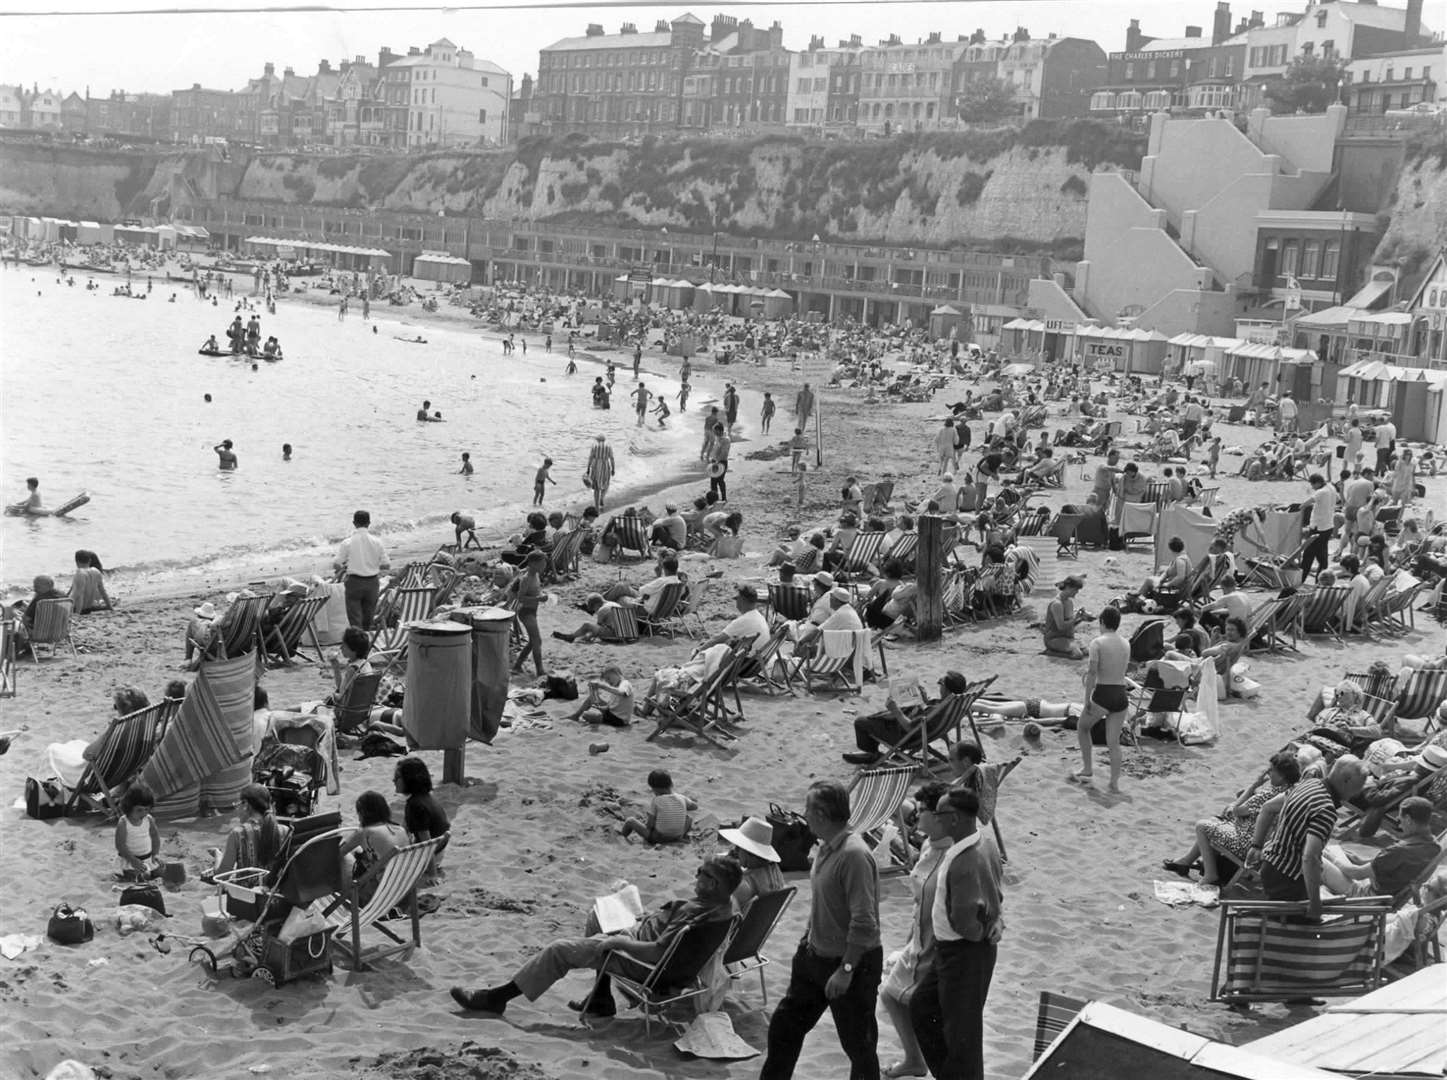 A packed Broadstairs beach in July 1969